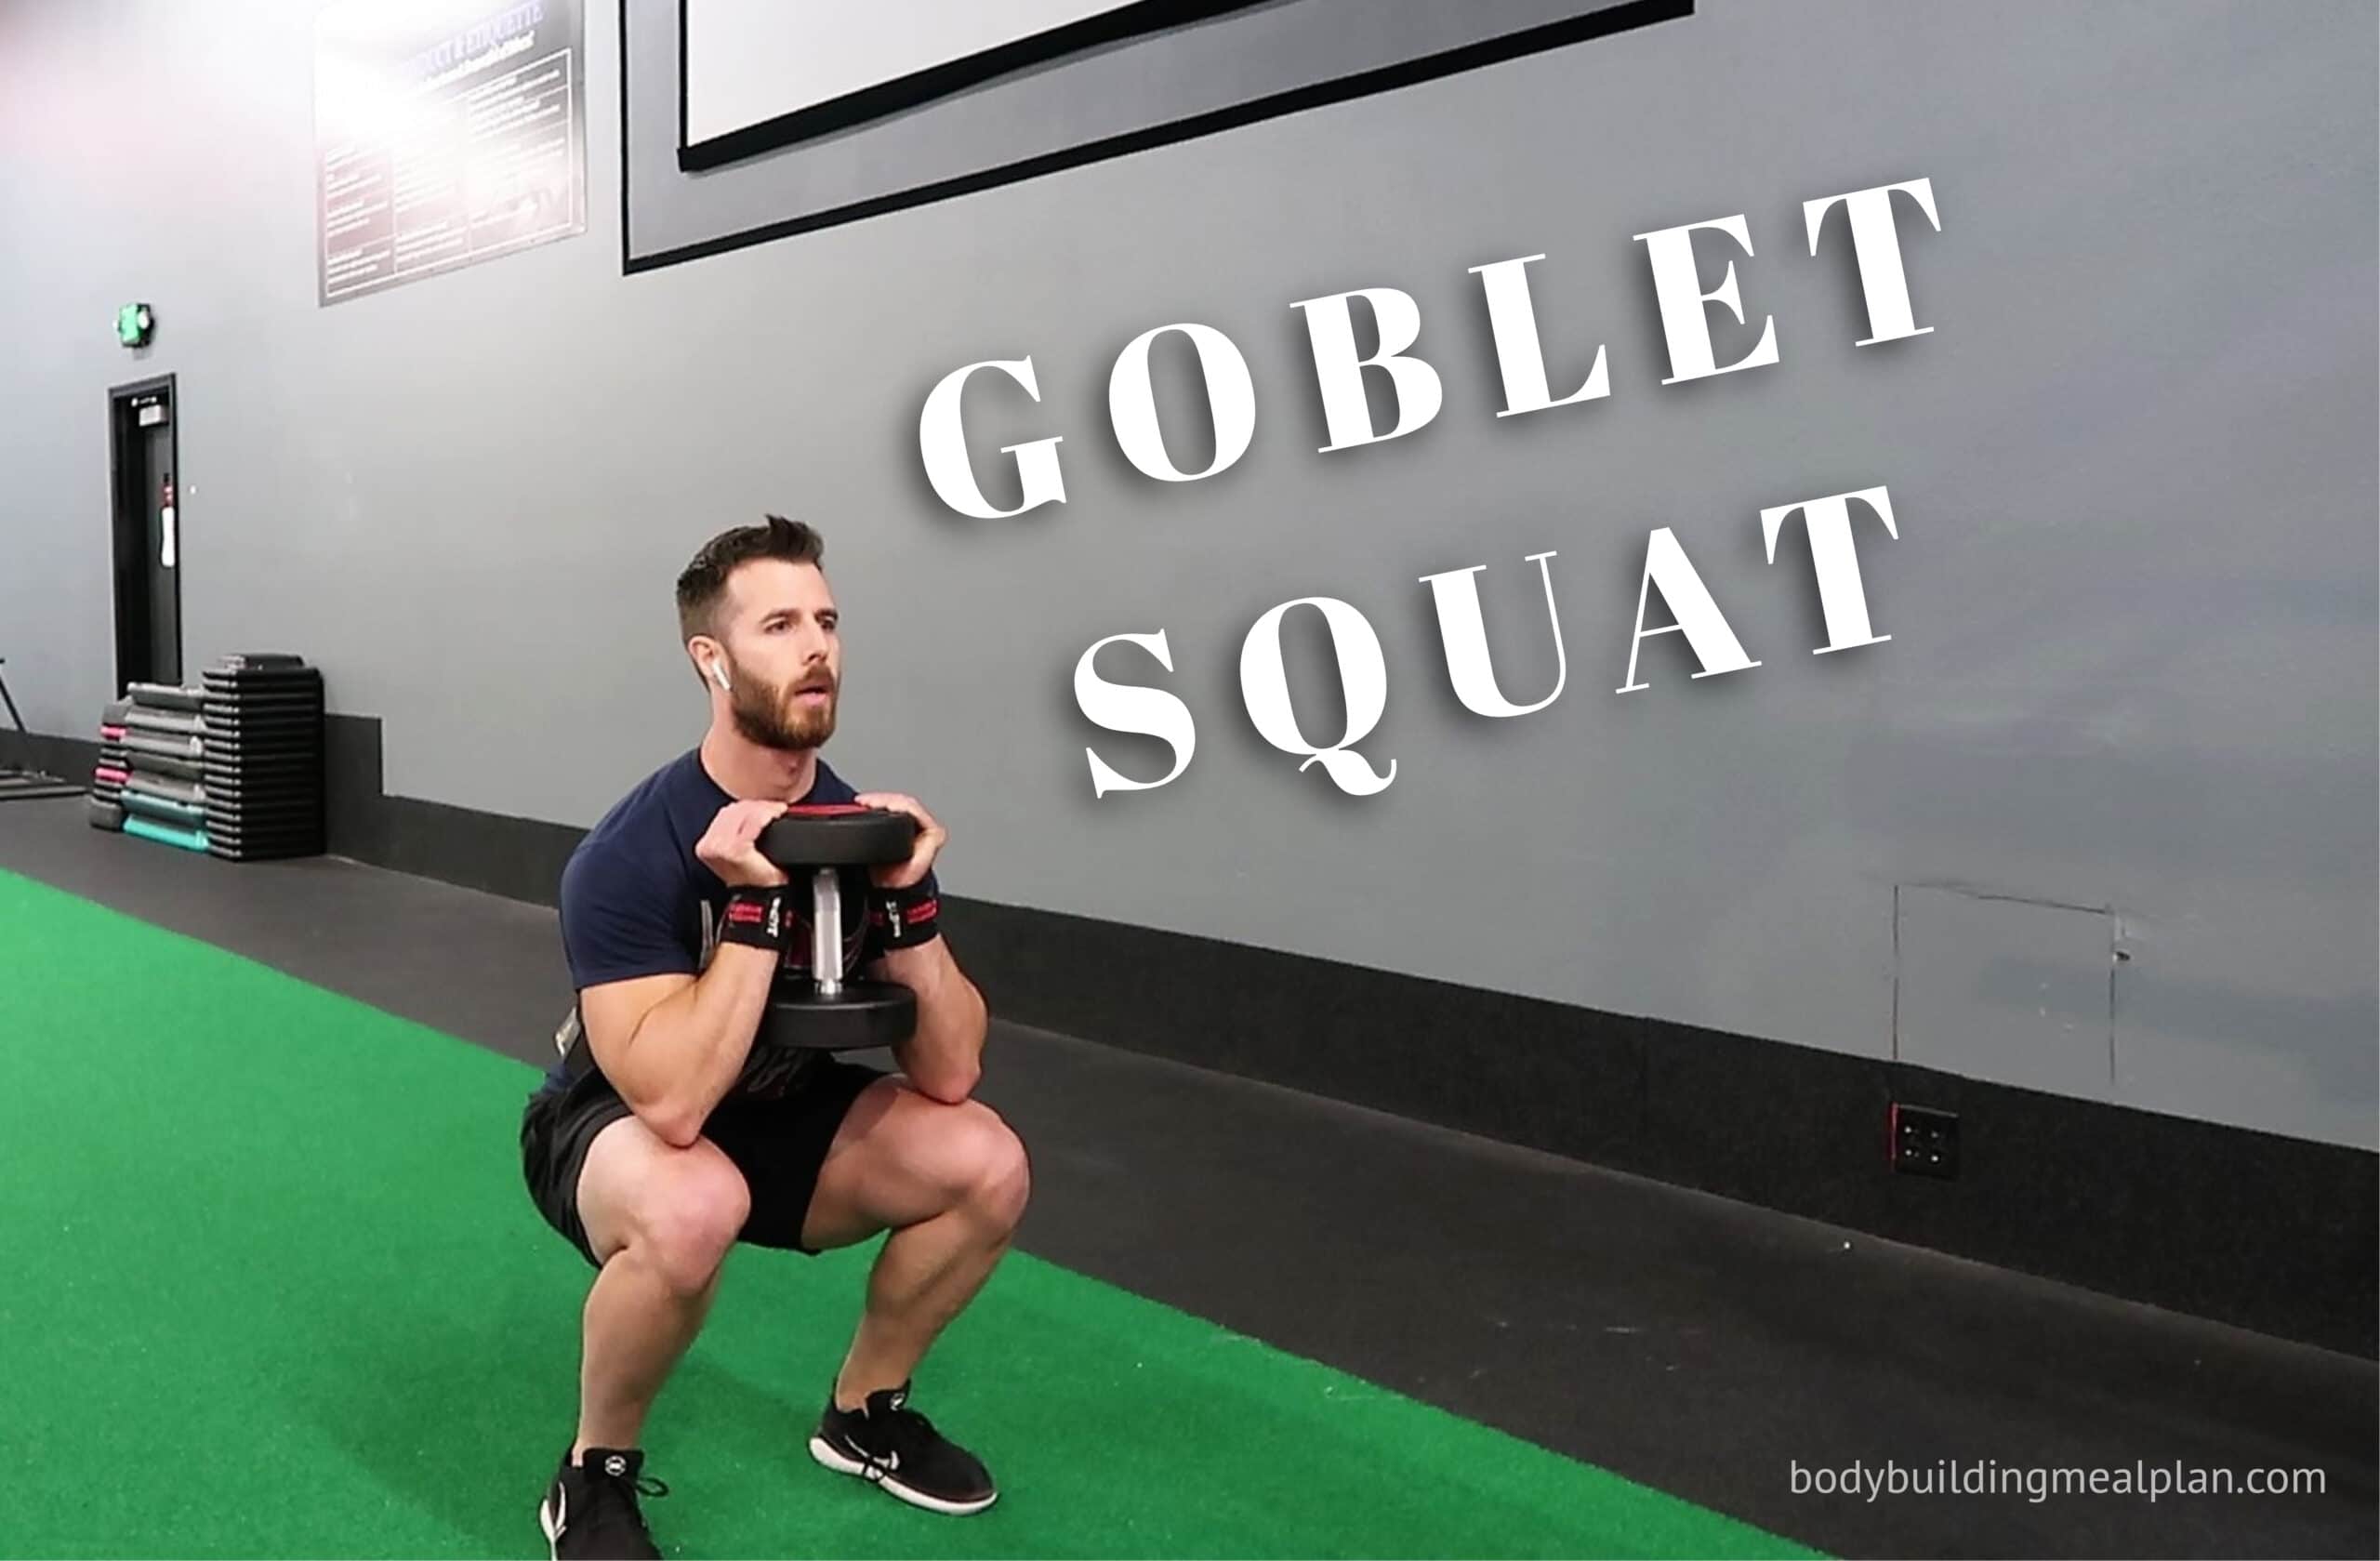 Squats vs Sumo Squats: Which Exercise Is More Effective?